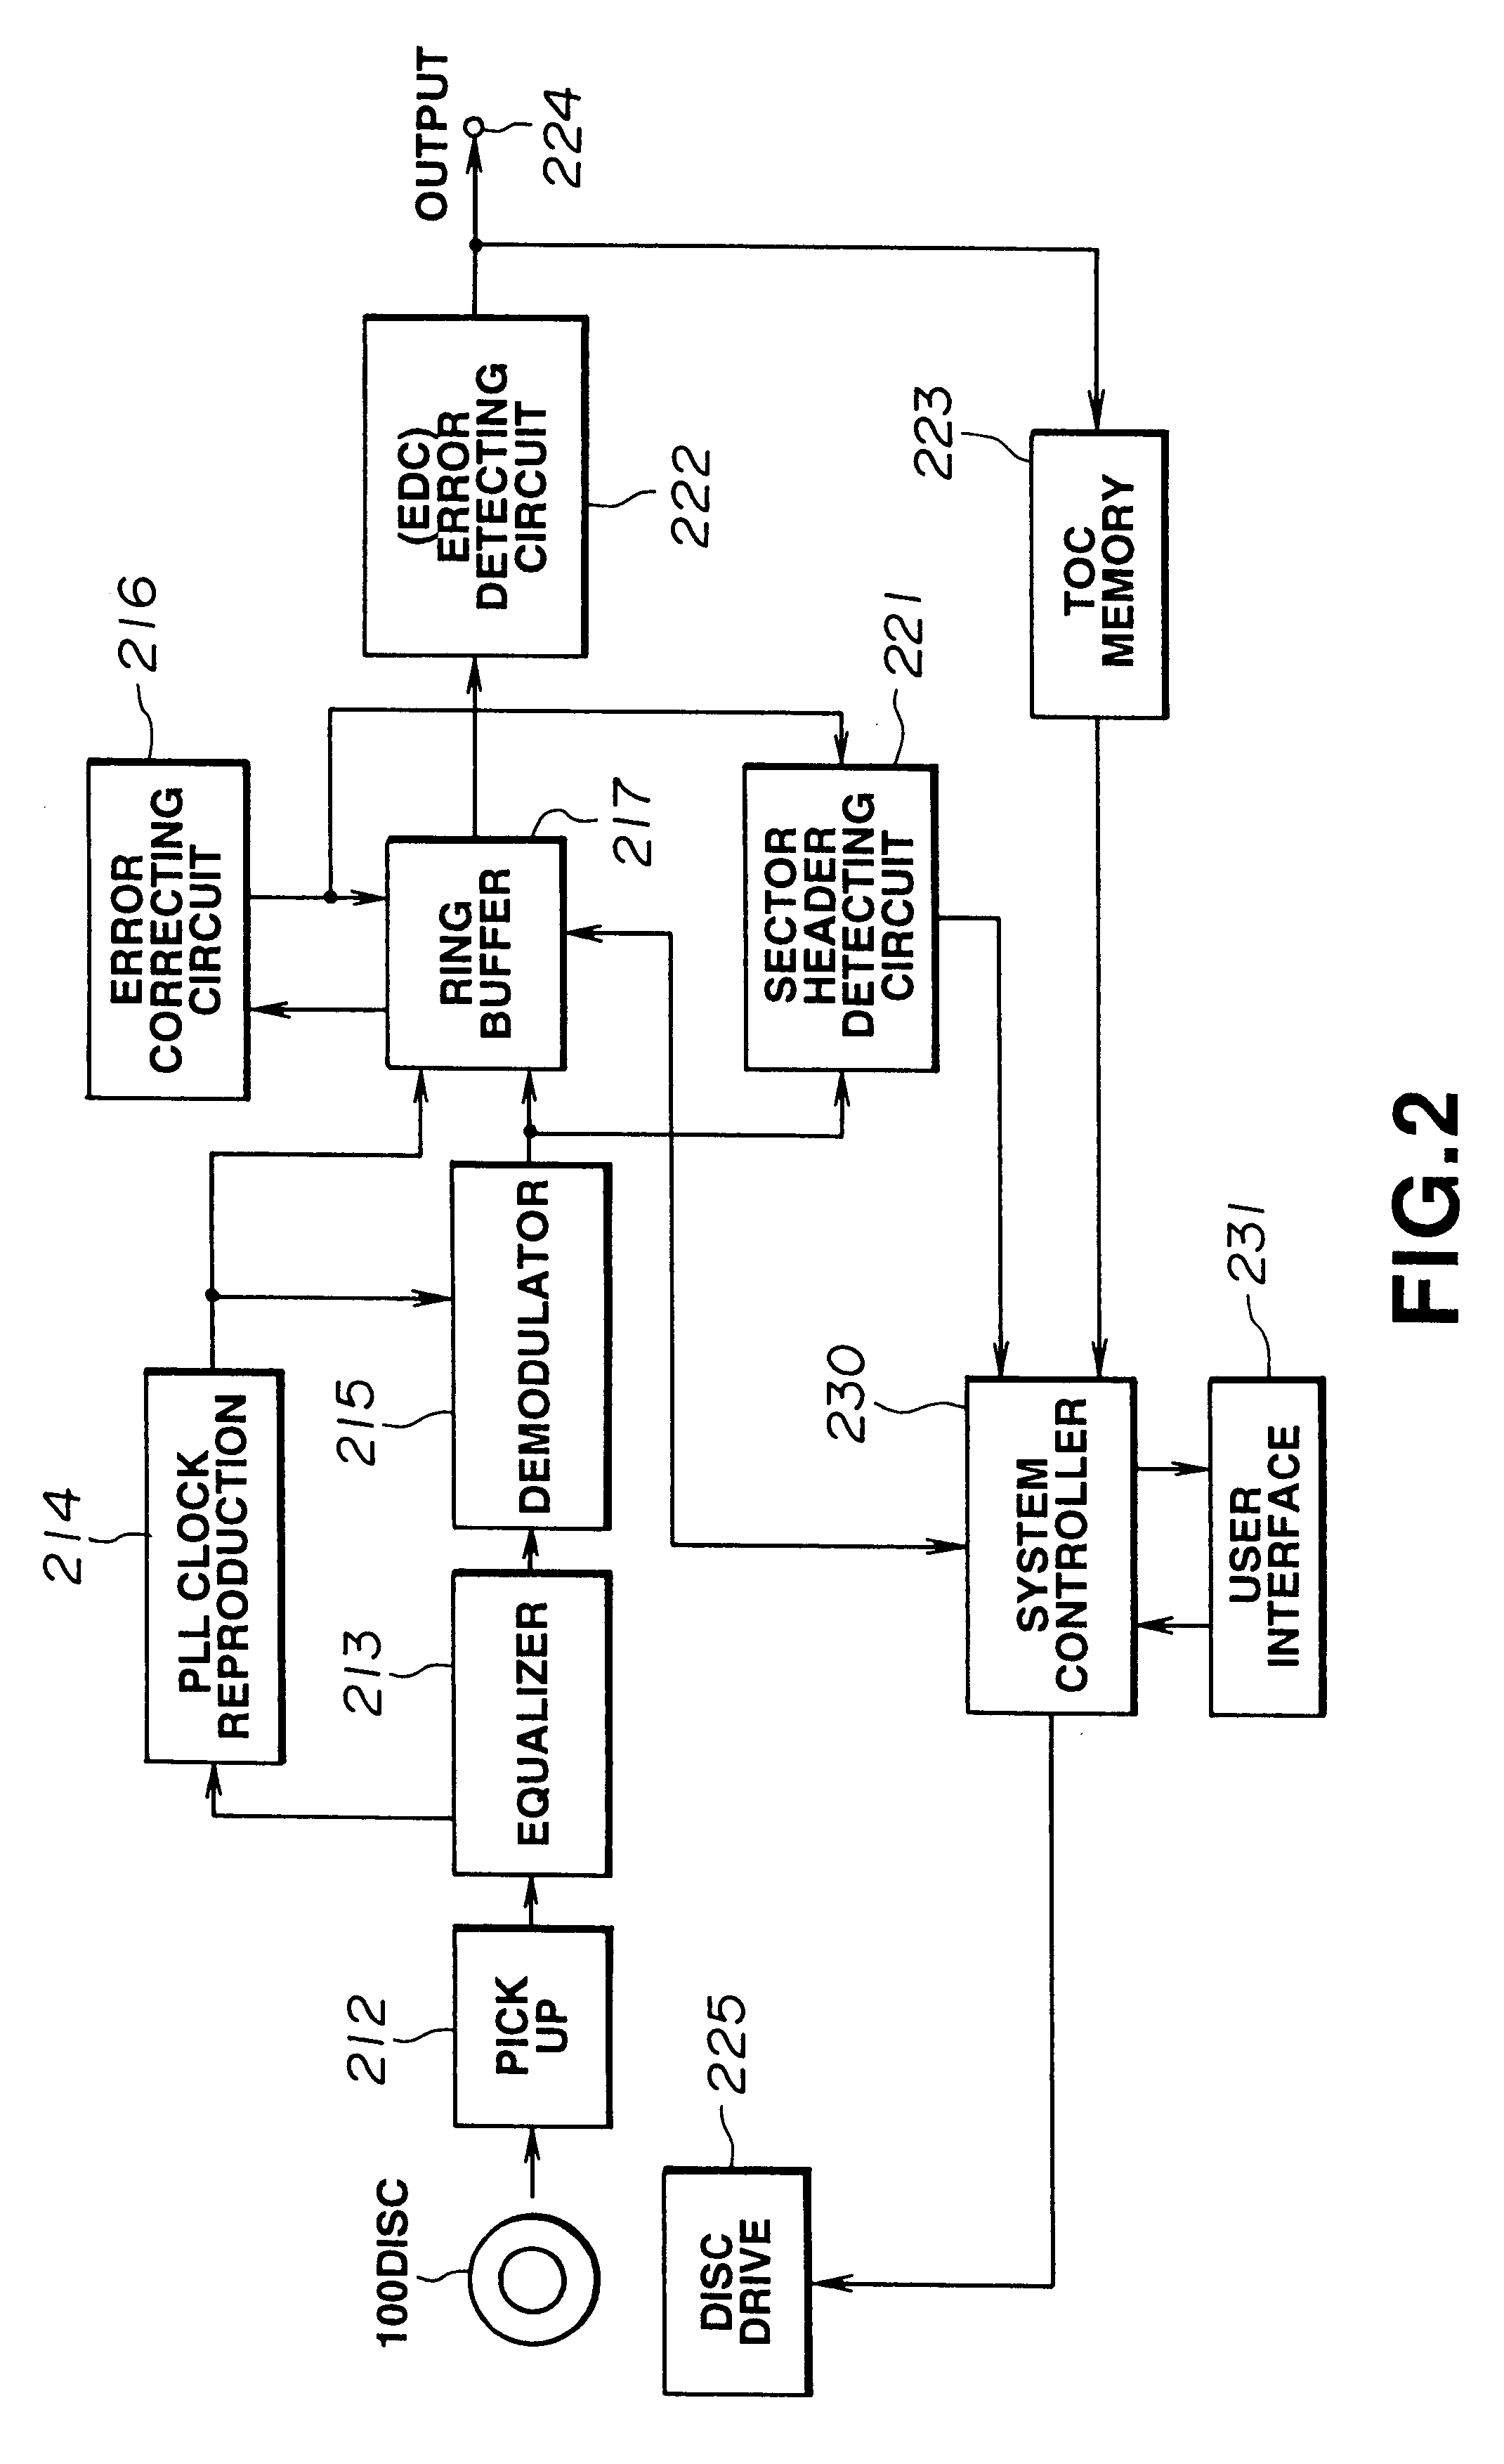 Method and apparatus for recovering TOC and user information from an optical disk and using the TOC information to access user tracks